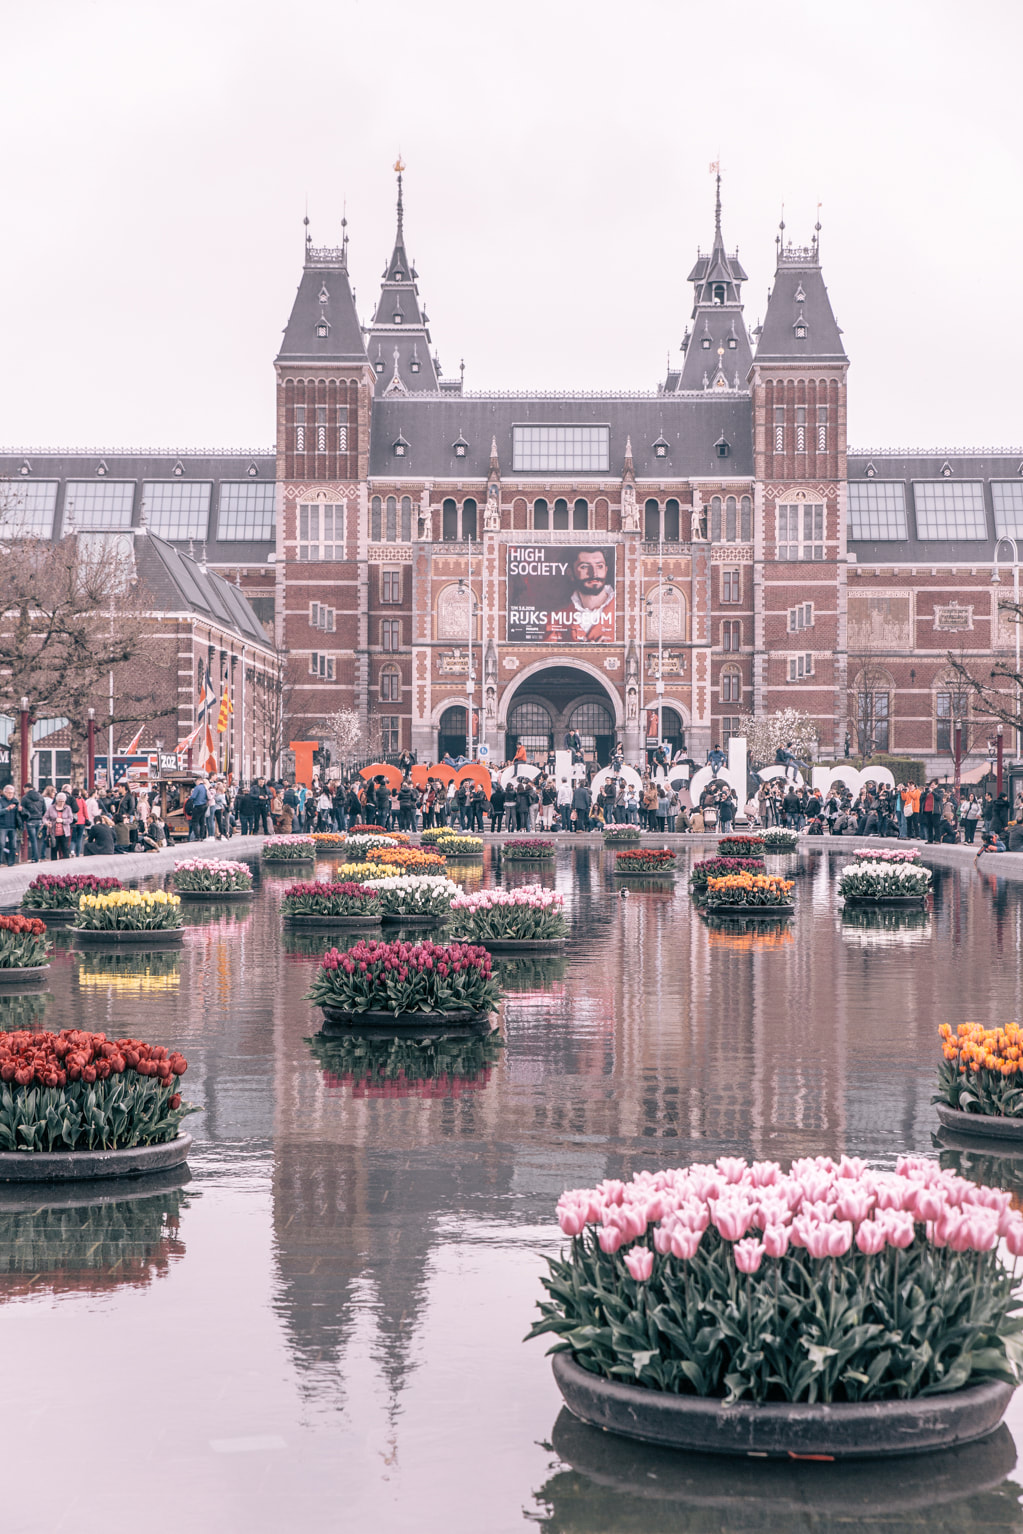 Amsterdam Rijksmuseum and the Moco museum by The Belle Blog